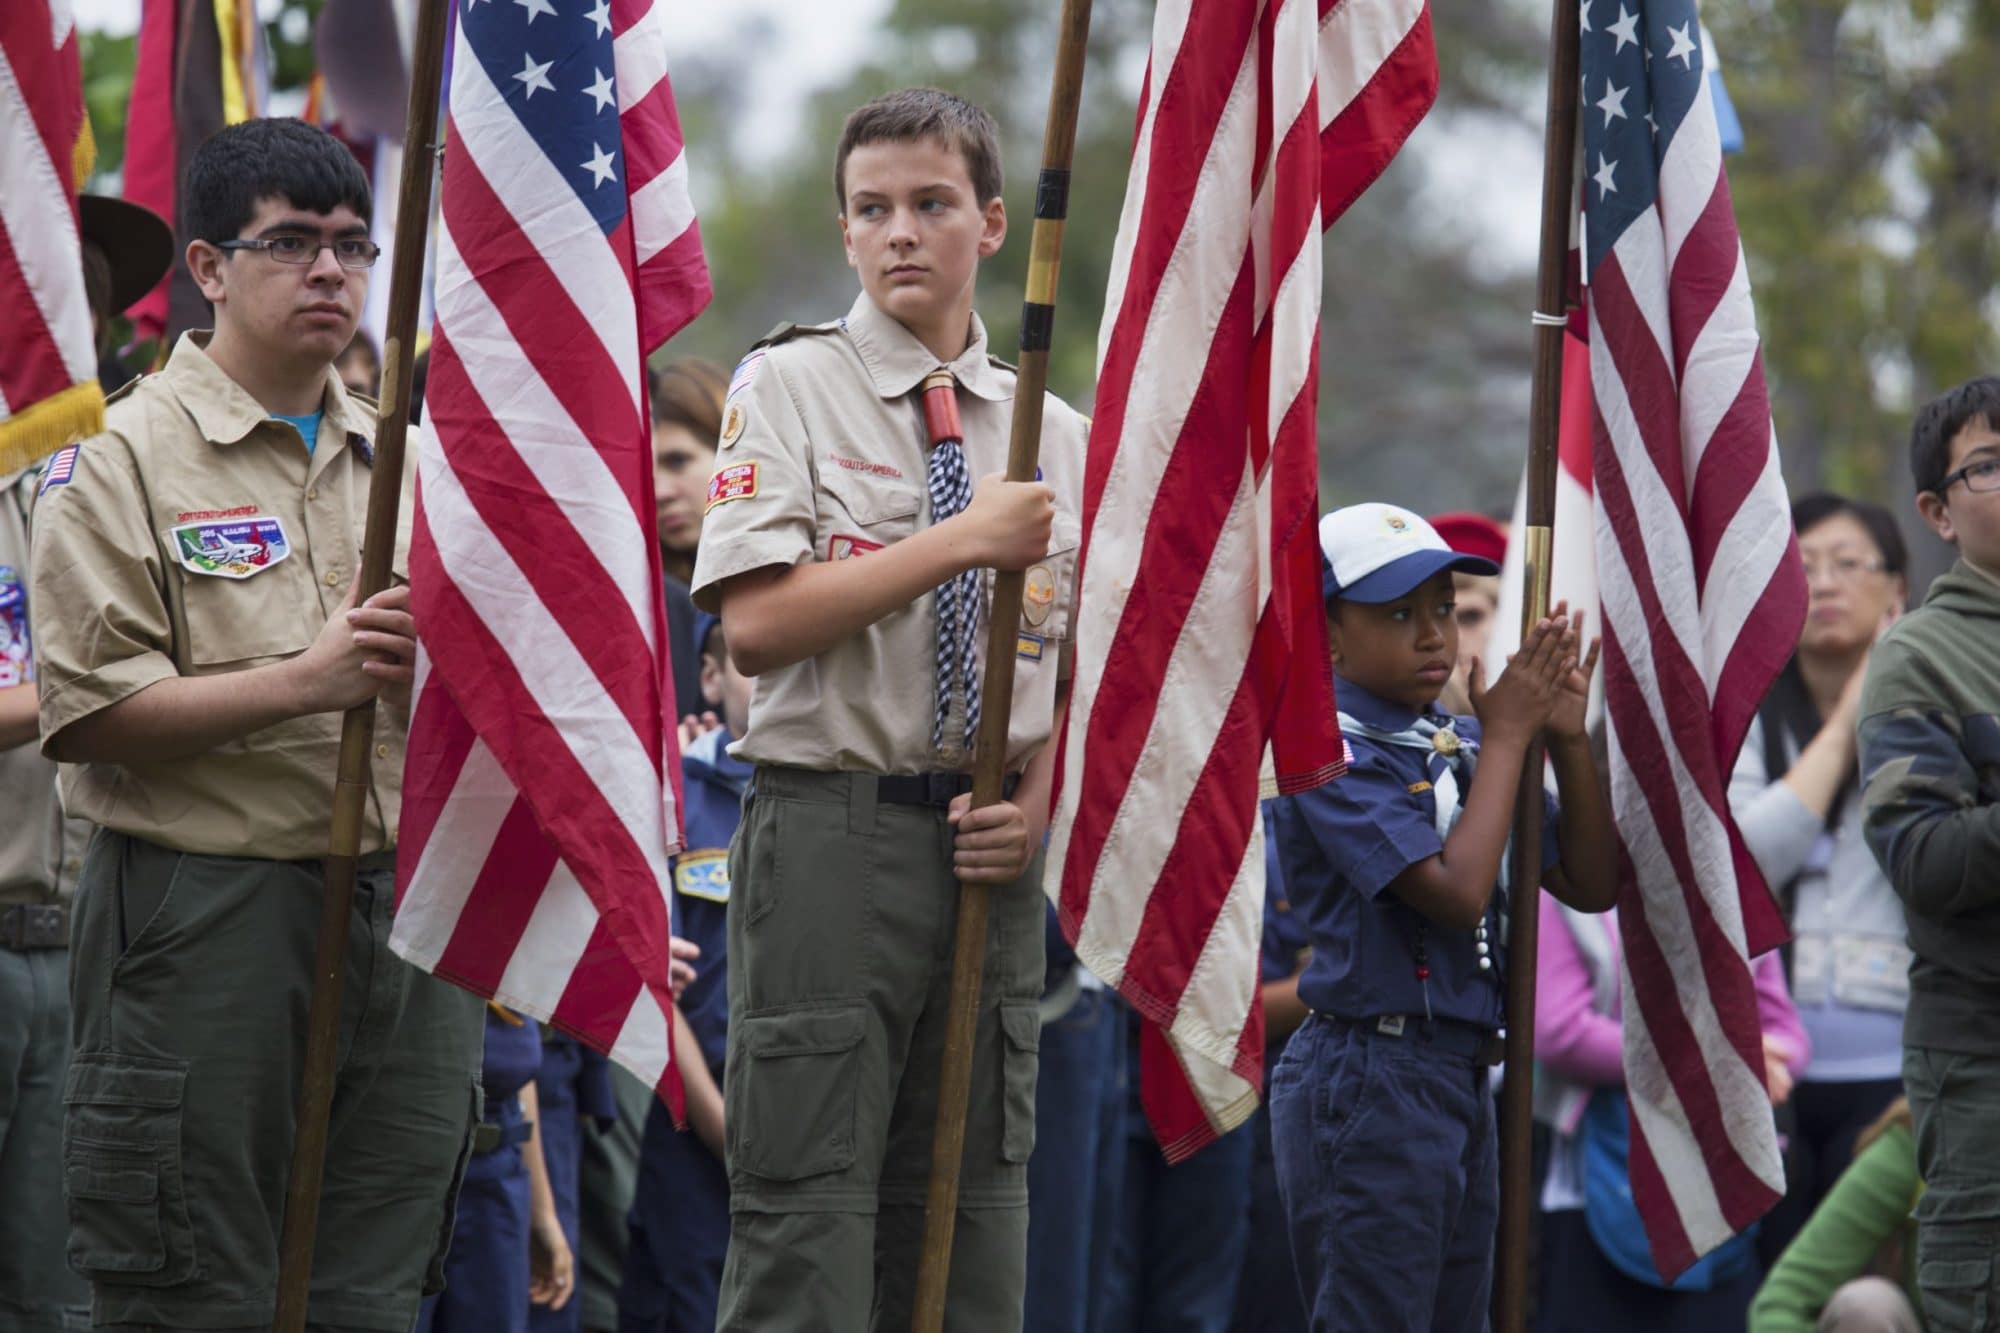 Boy Scouts in Los Angeles Scouting Abuse